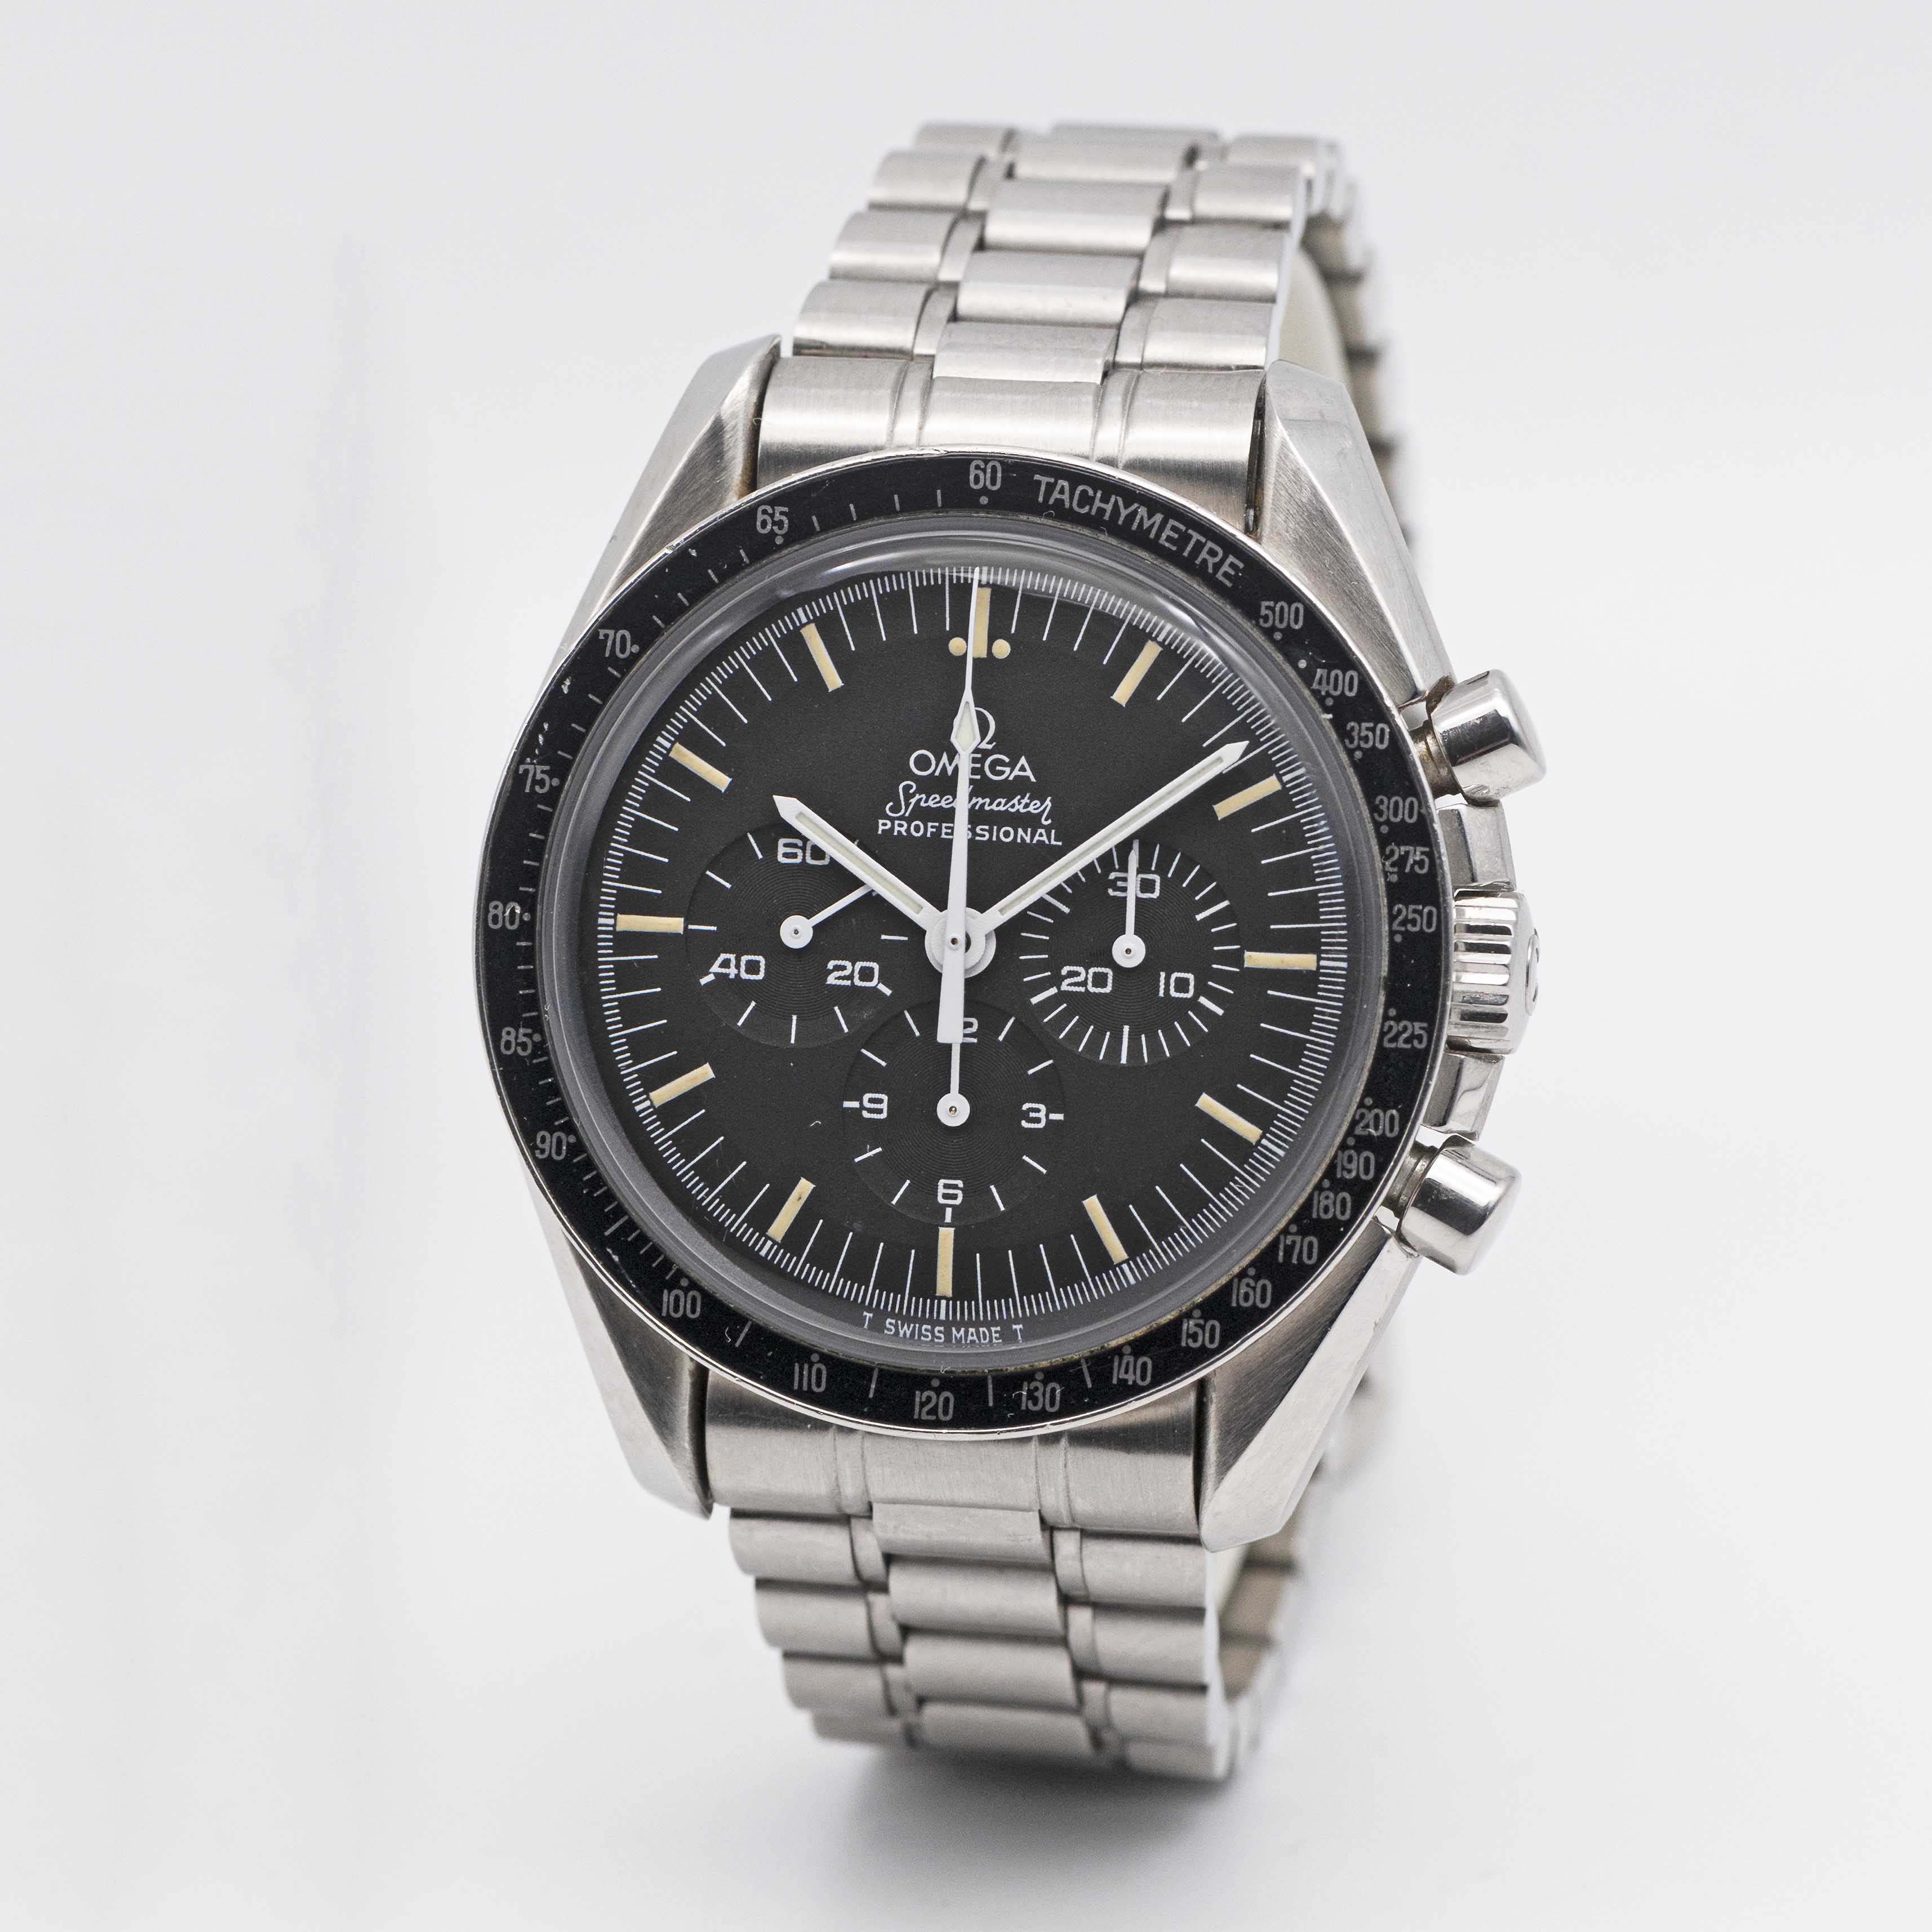 A GENTLEMAN'S STAINLESS STEEL OMEGA SPEEDMASTER PROFESSIONAL "MOONWATCH" CHRONOGRAPH BRACELET - Image 3 of 10